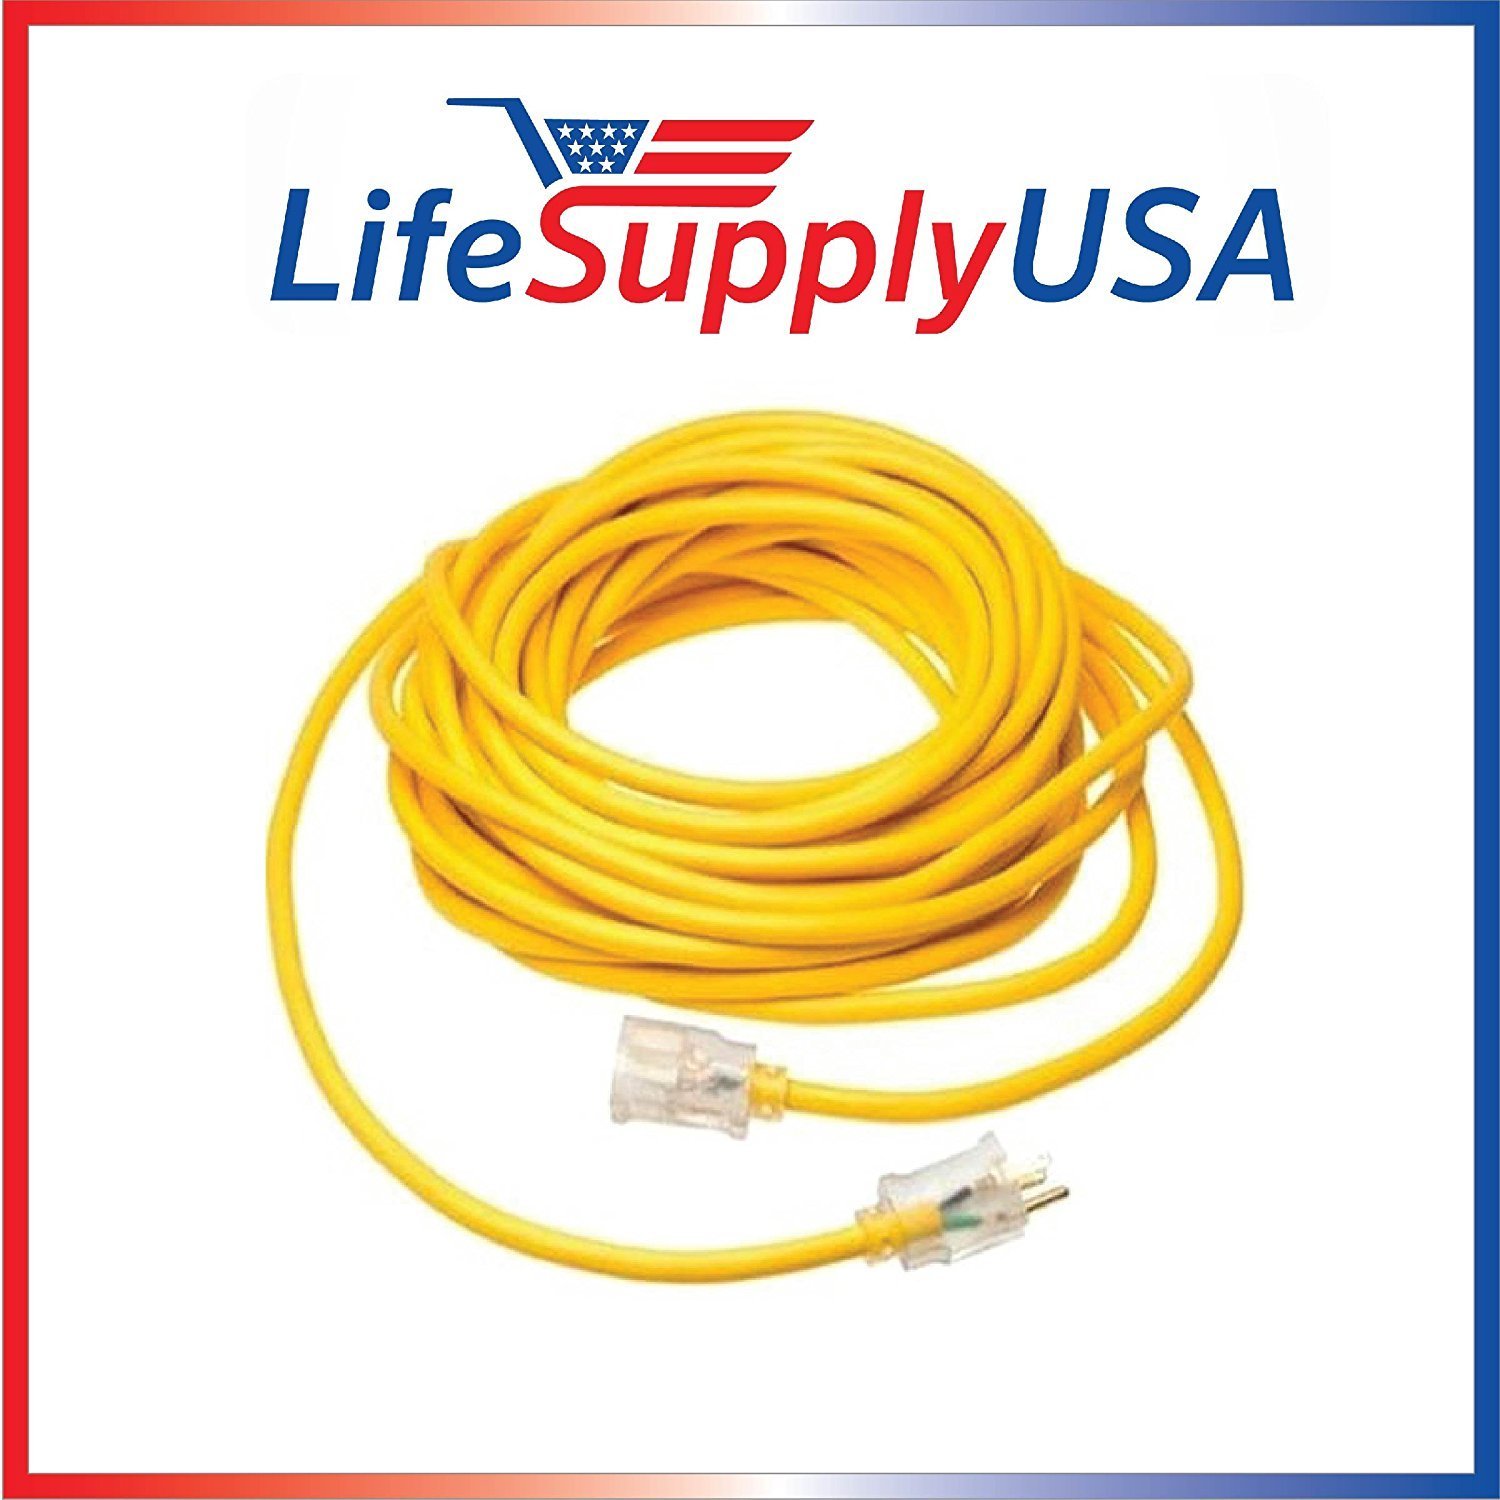 50 Pack 200 ft. 10/3 SJTW Lighted End Heavy Duty Extension Cord (200 ft.)  Walmart Canada